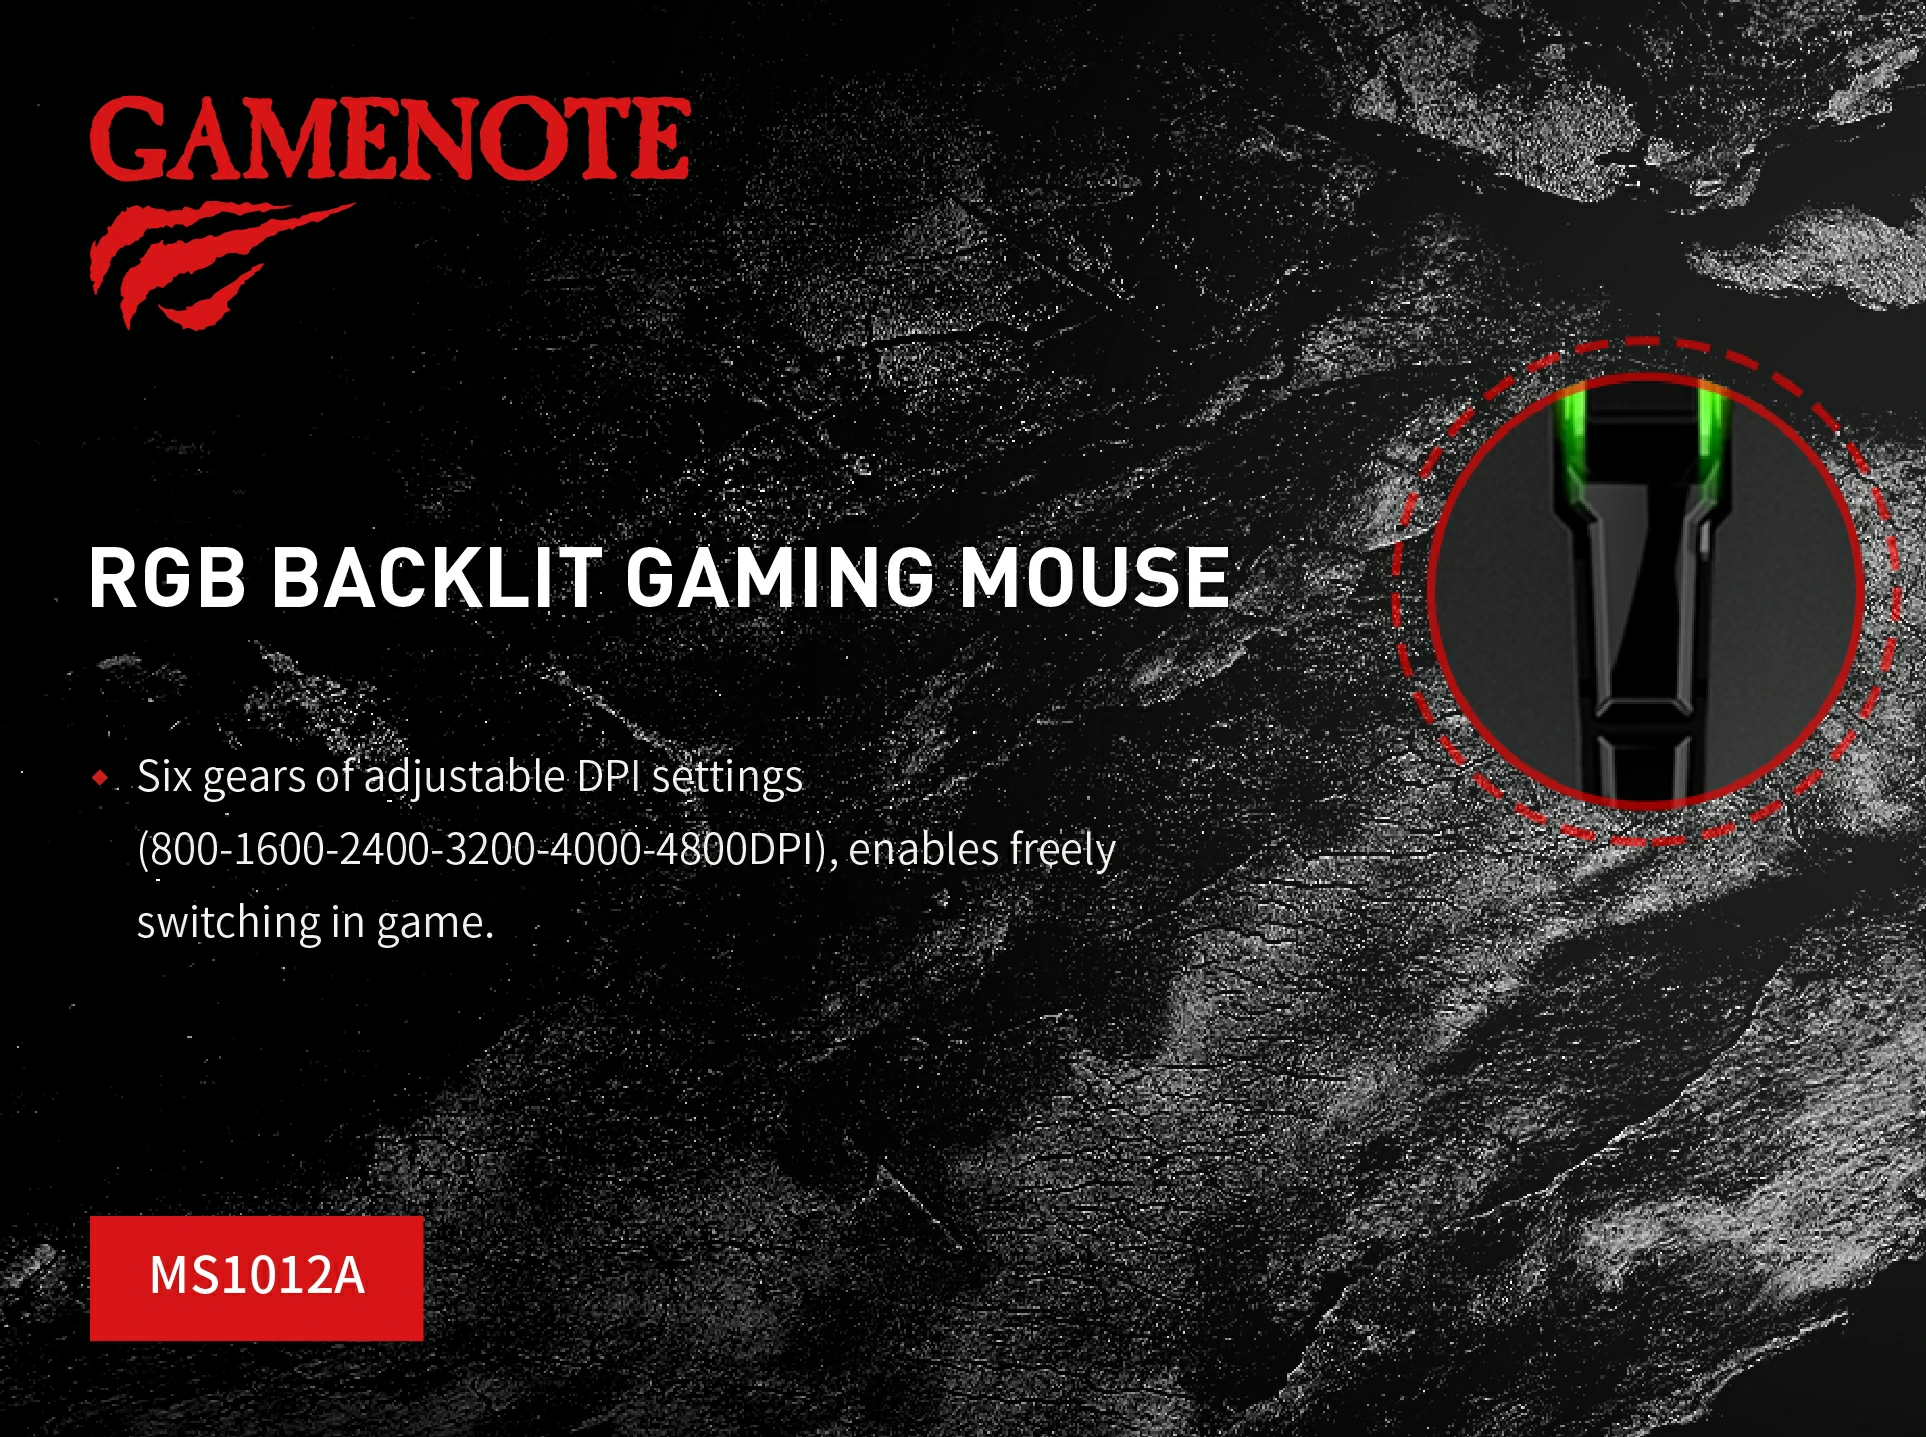 Overview - Havit - MS1012A Gamenote RGB Backlit Gaming Mouse